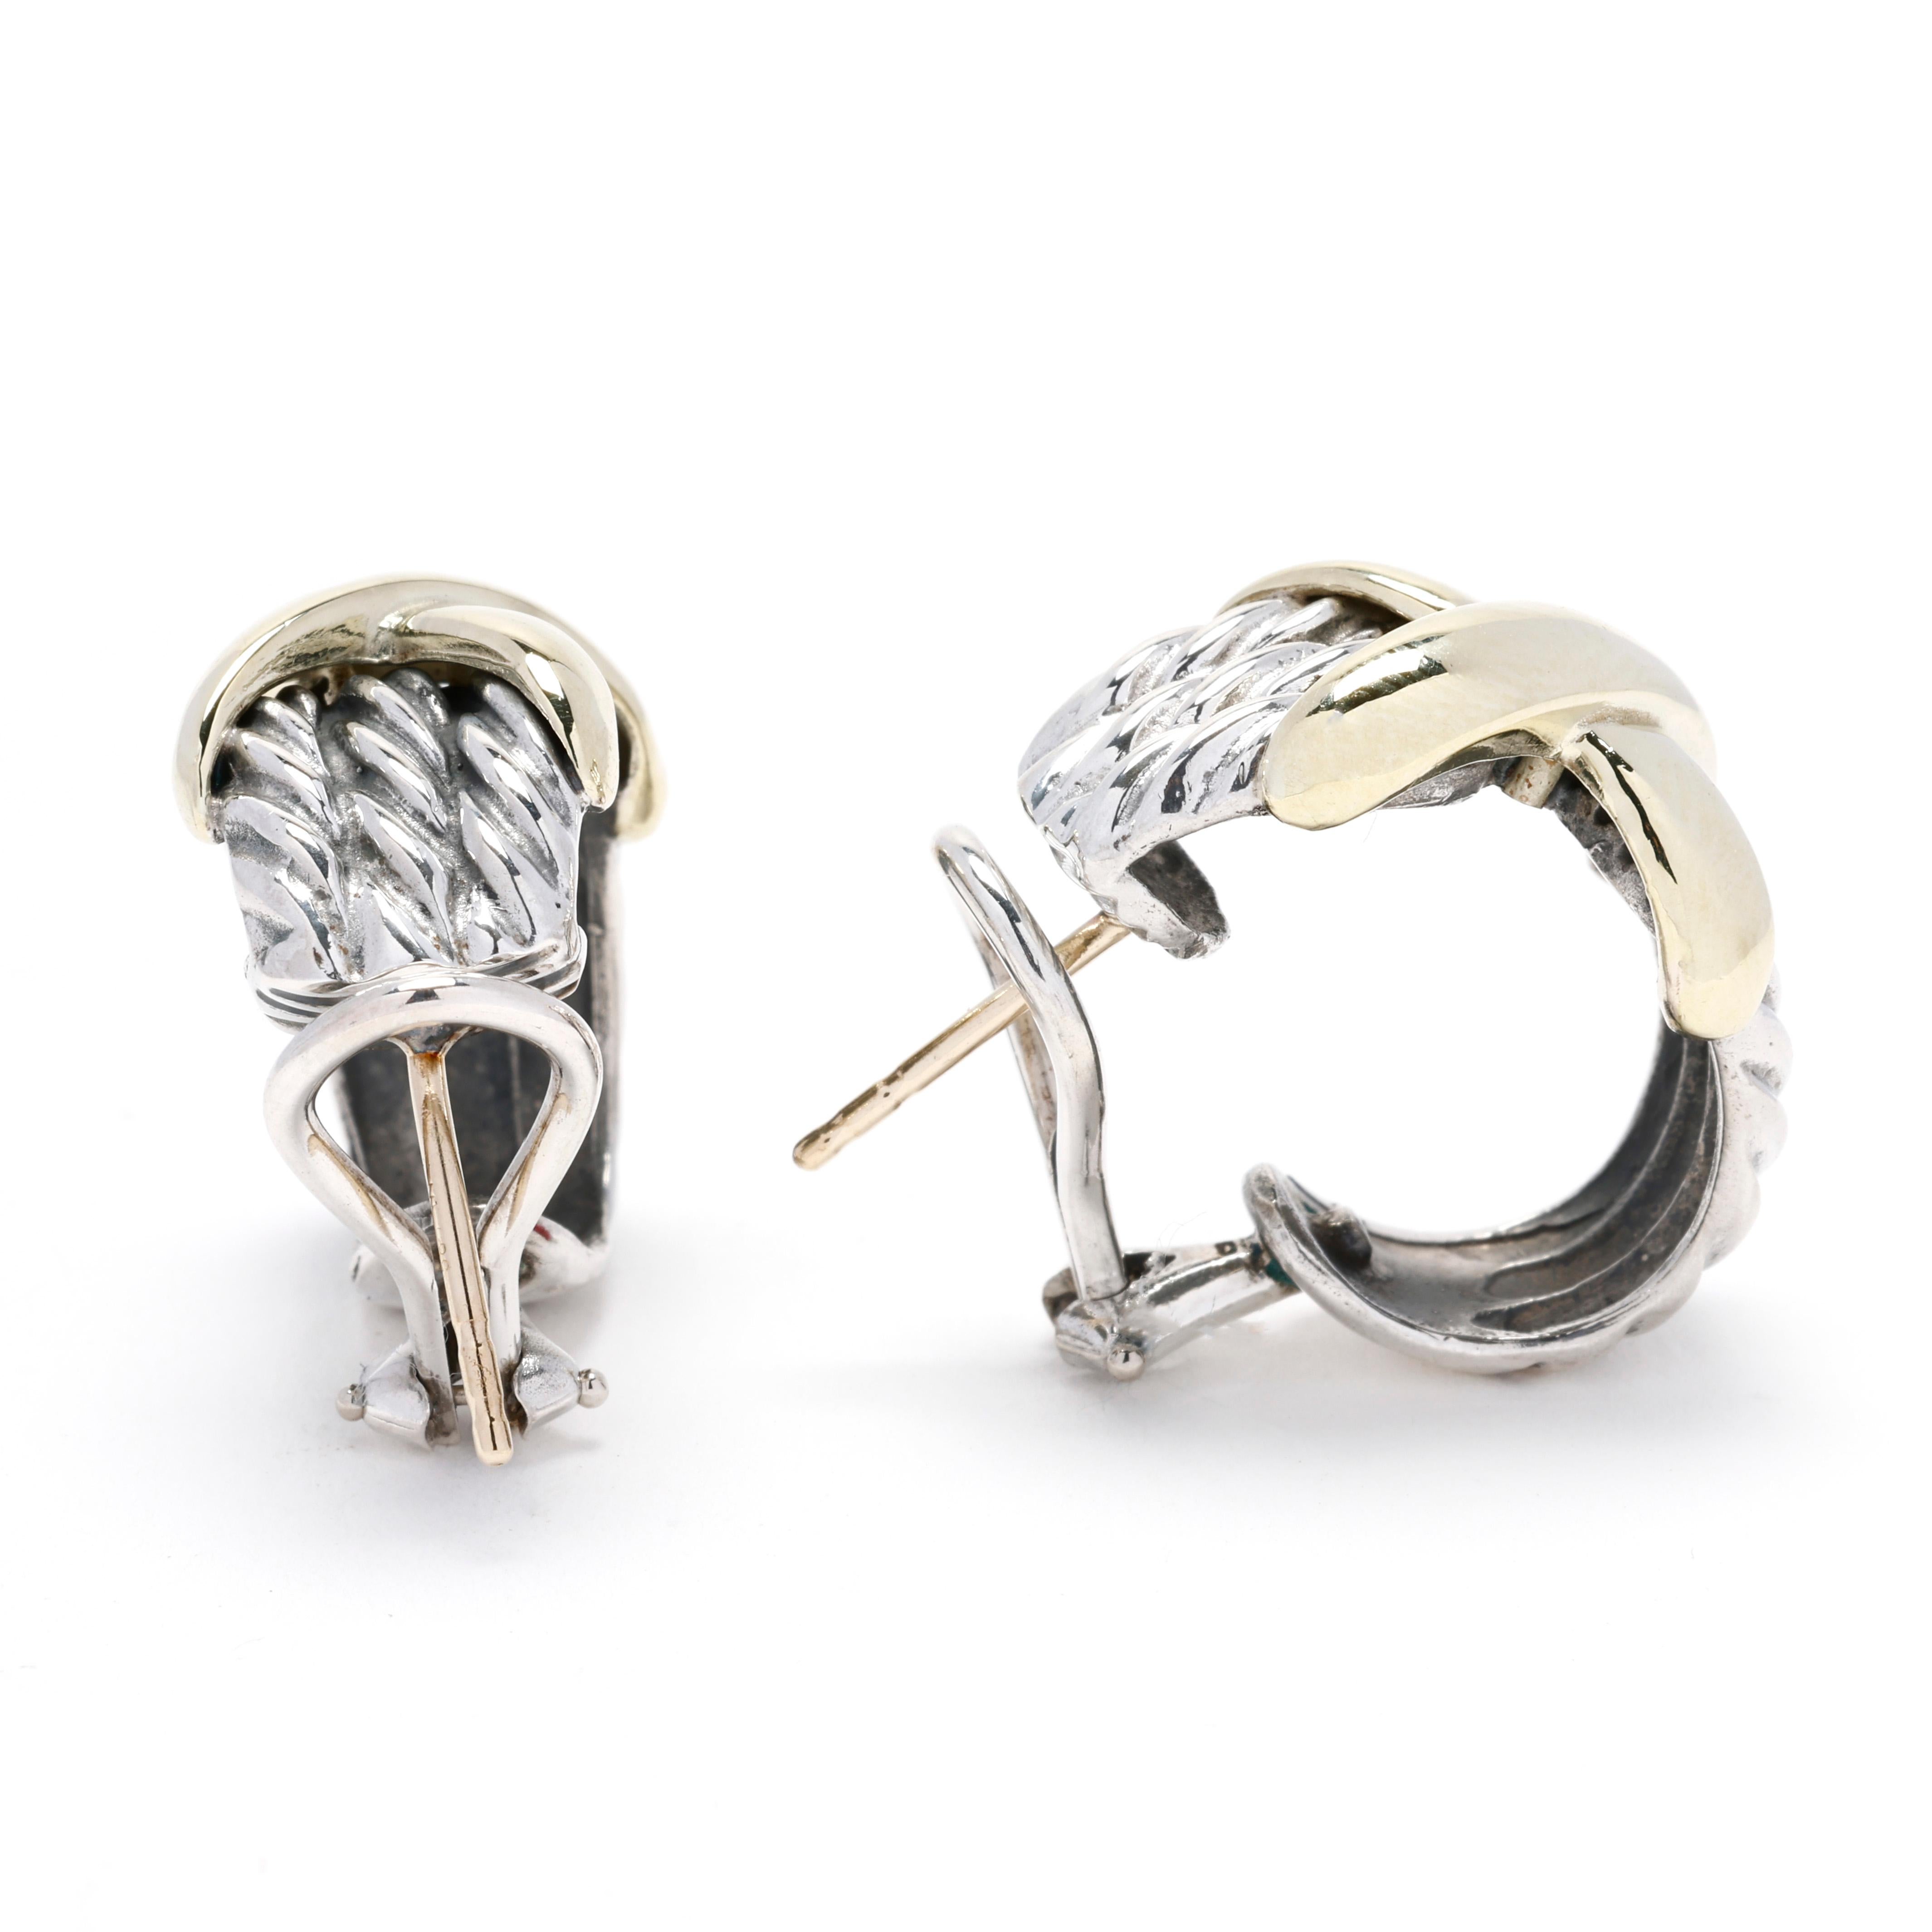 Experience the iconic design and impeccable craftsmanship of David Yurman with these exquisite Gold and Sterling Silver X Hoop Earrings. These stunning earrings feature a unique combination of an 18k and 14k yellow gold X on top of the twisted